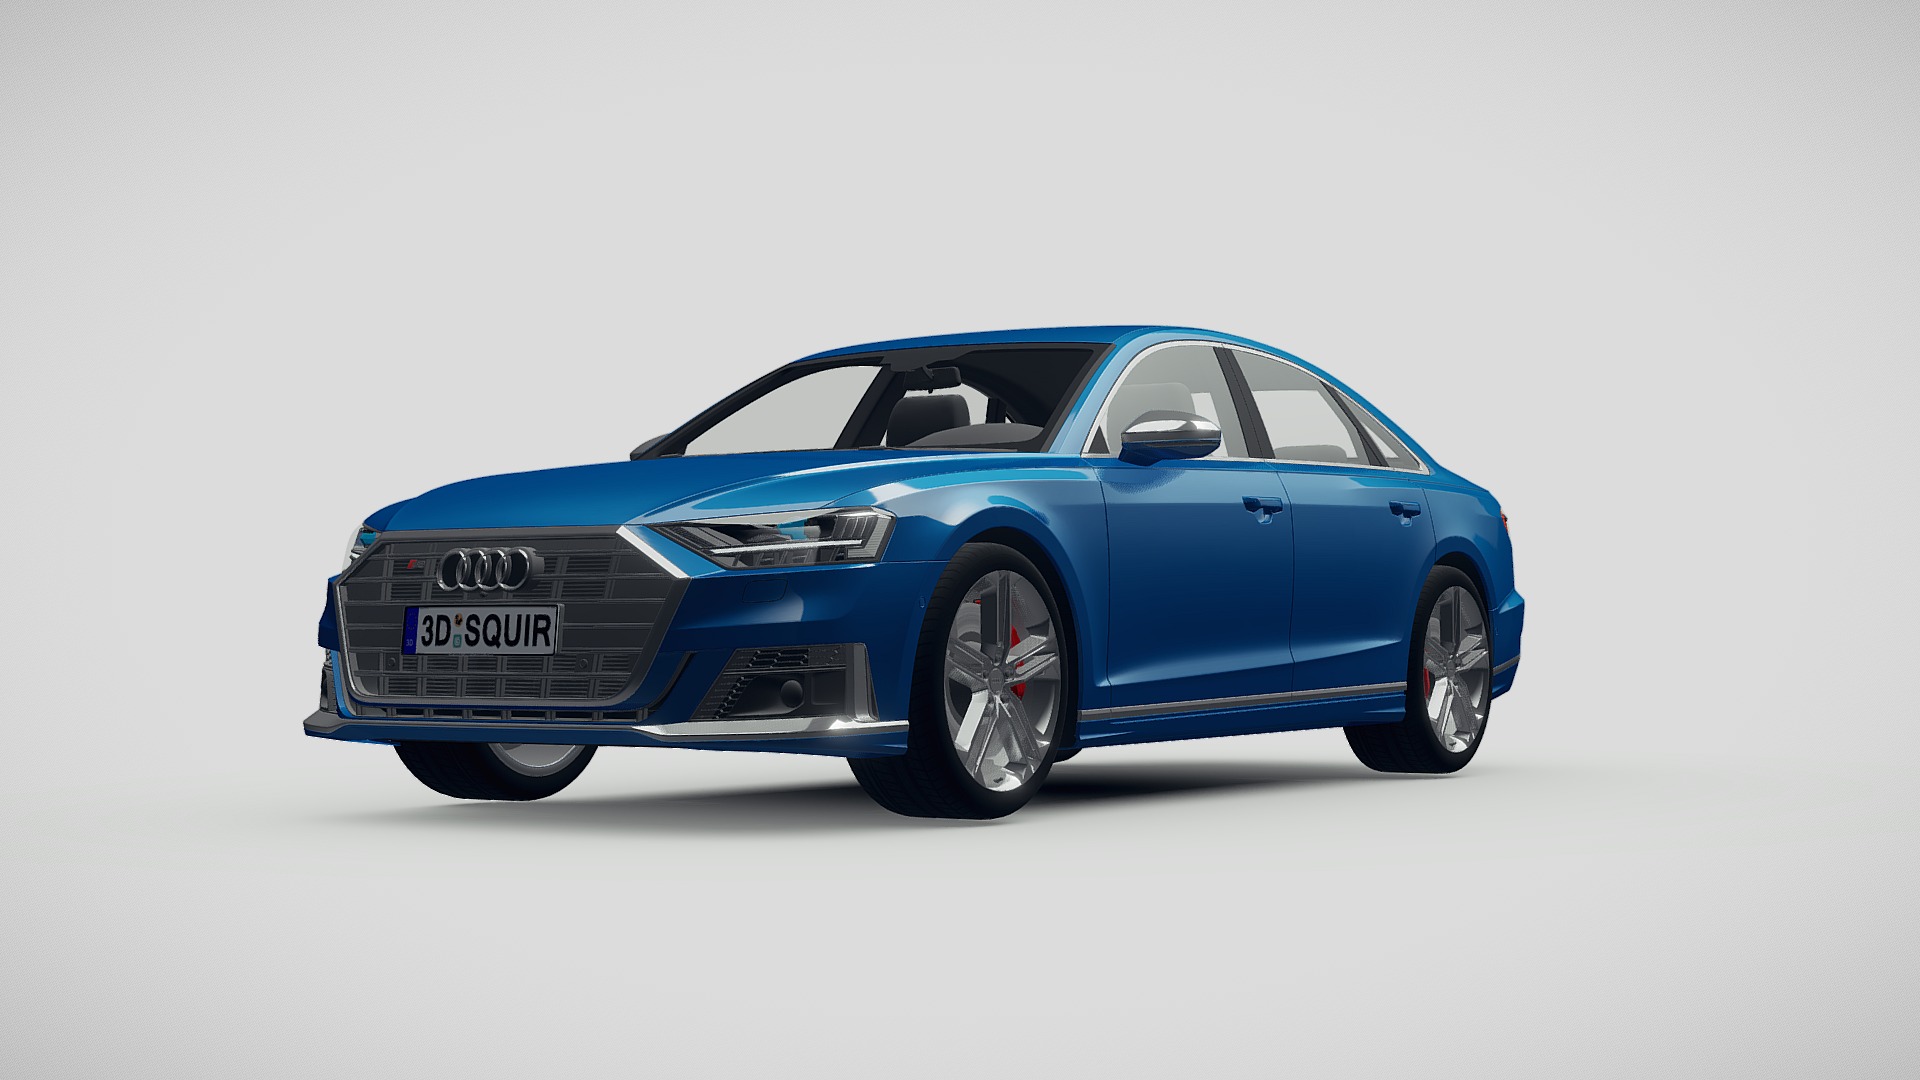 3D model Audi S8 2020 - This is a 3D model of the Audi S8 2020. The 3D model is about a blue car with a white background.